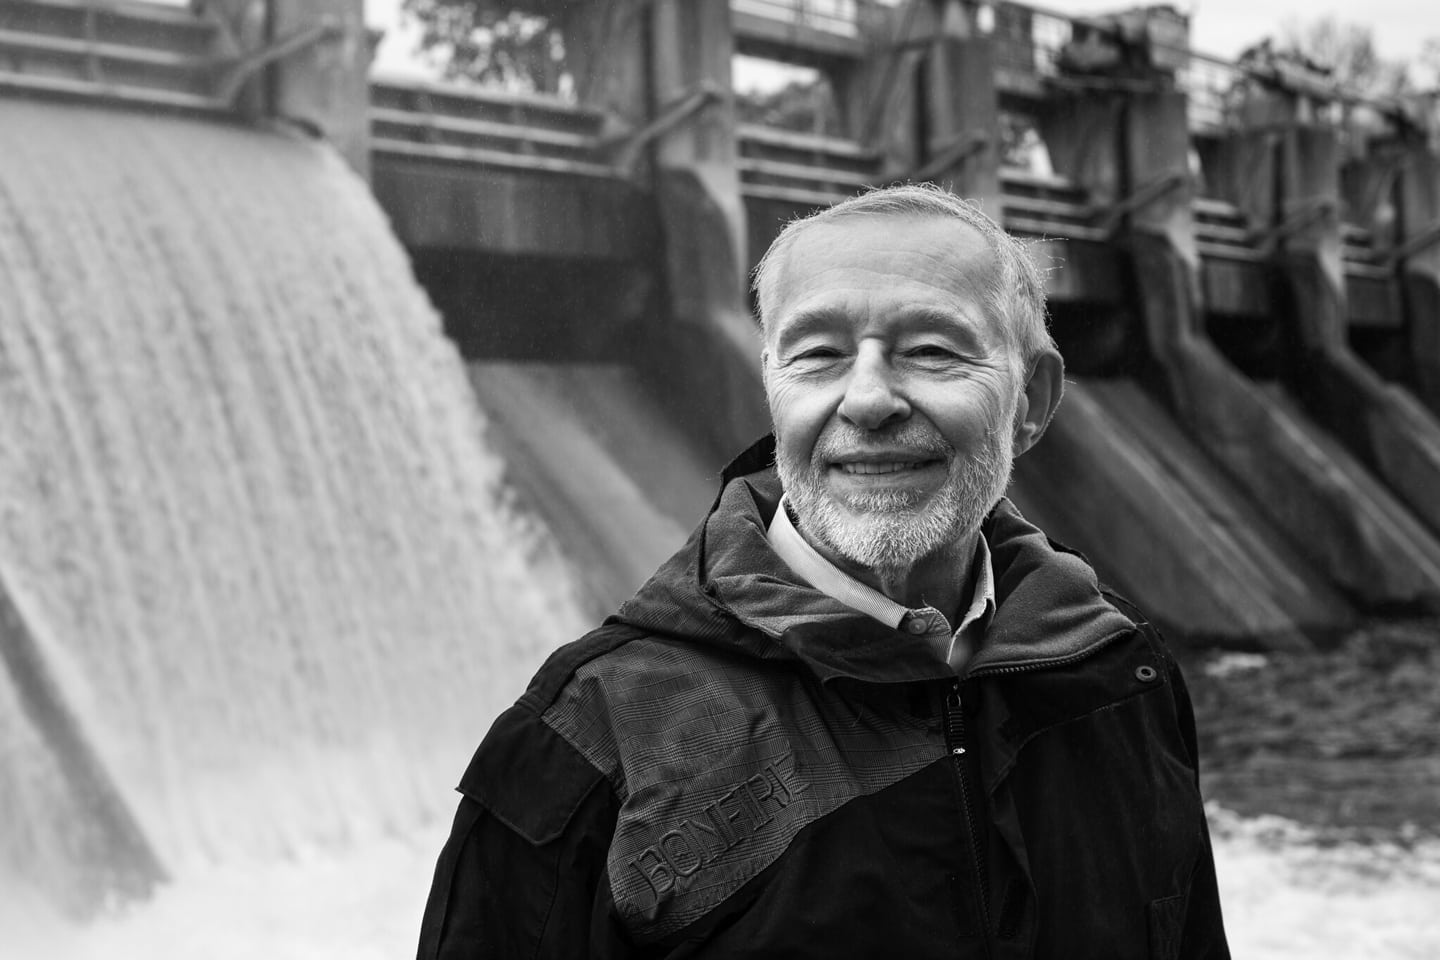 Daigger stands next to a small dam. To his back, water rushes into a body of water. Daigger is standing in a windbreaker jacket and is smiling. The image has a moody black and white treatment.